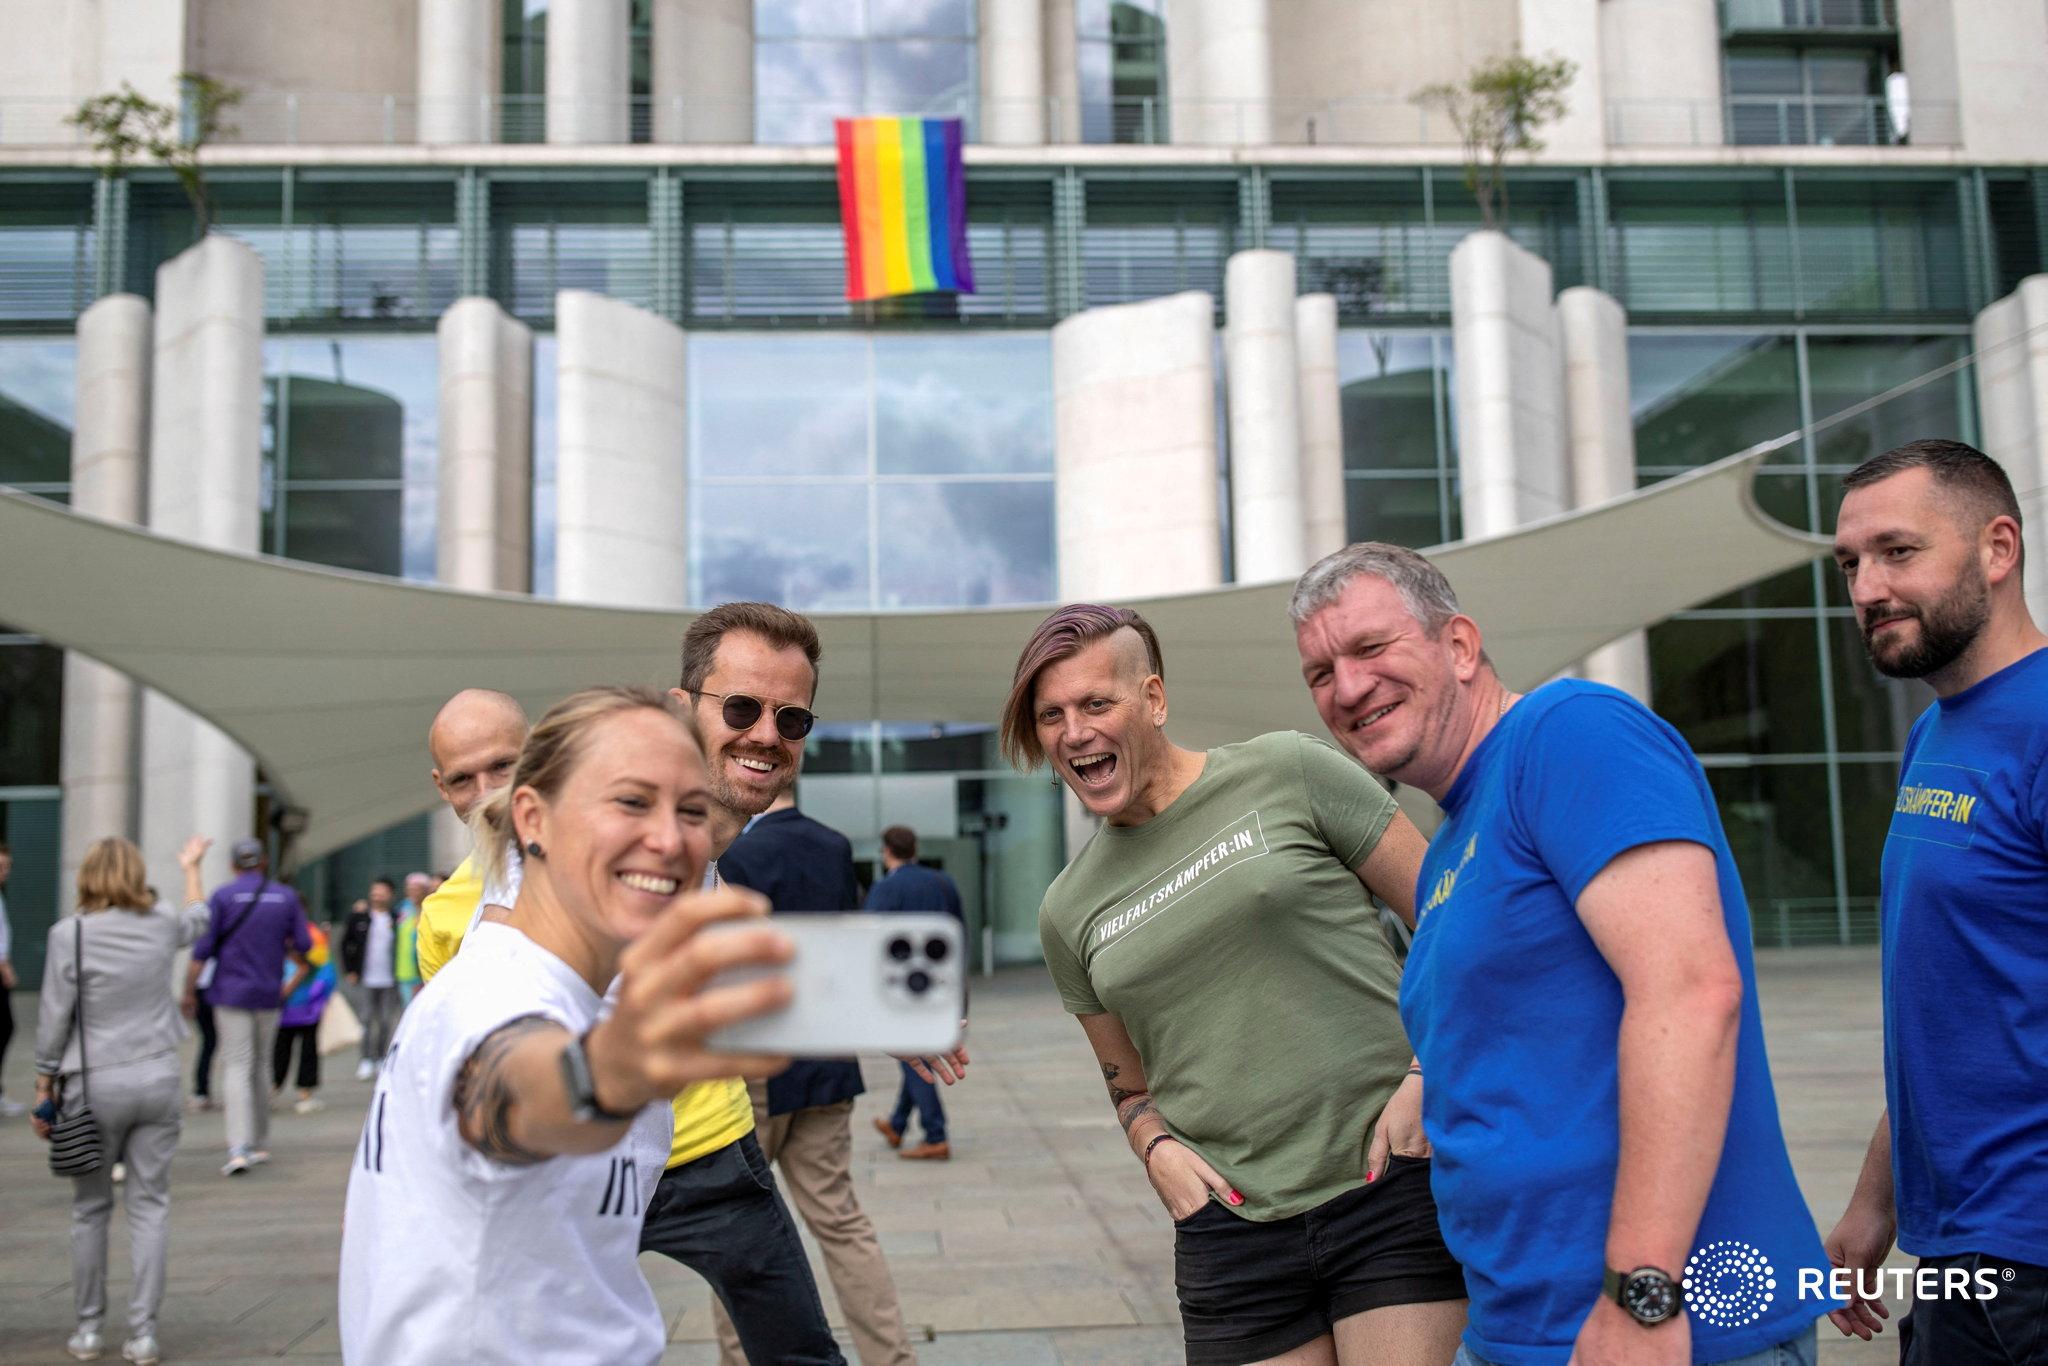 German LGBTQ activist warns over 'worrying' hate crime rise for REUTERS